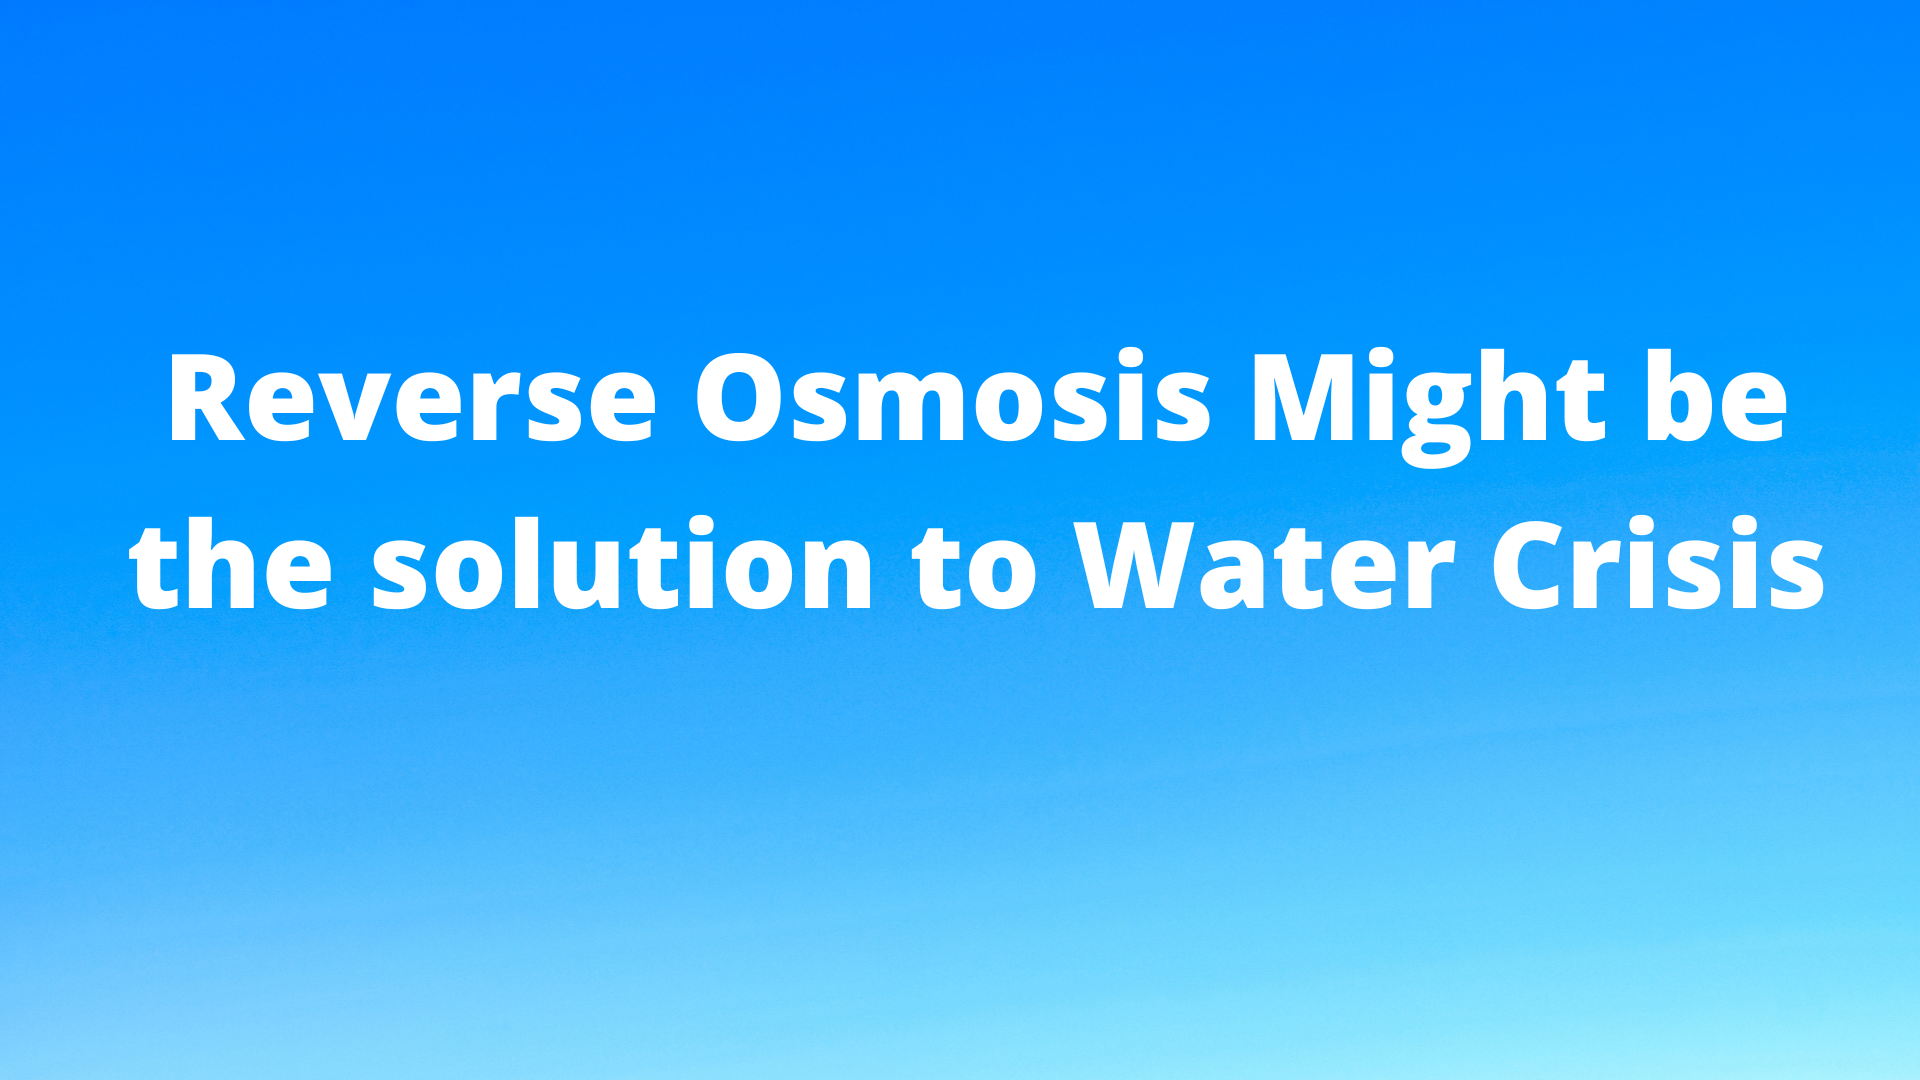 Water shortage and Reverse Osmosis solution